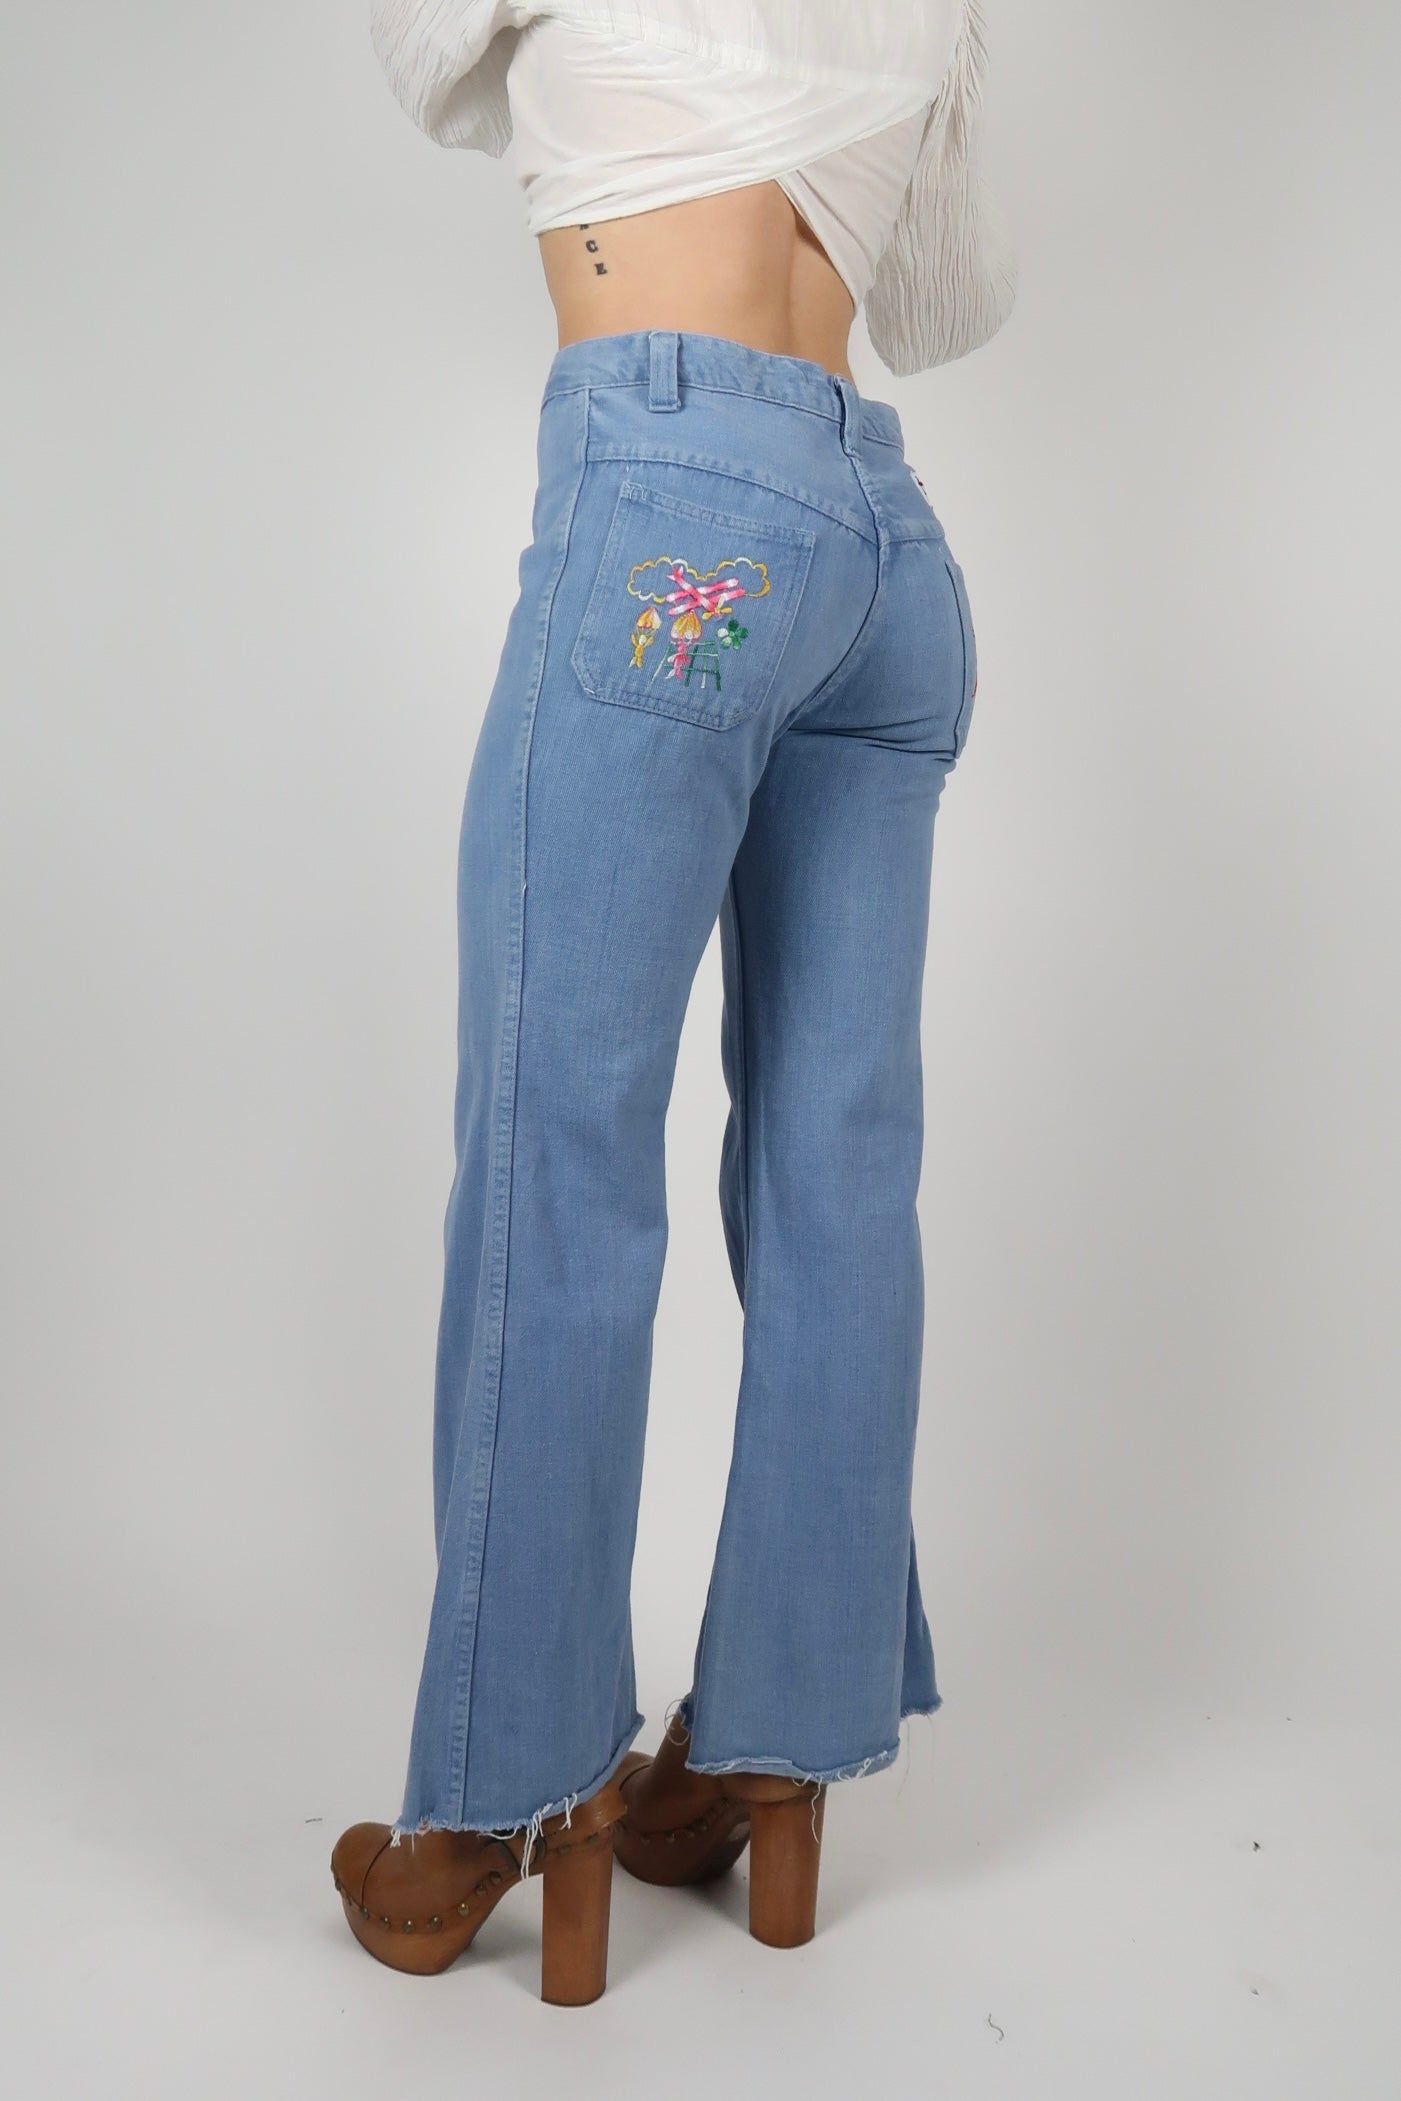 1970s embroidered jeans